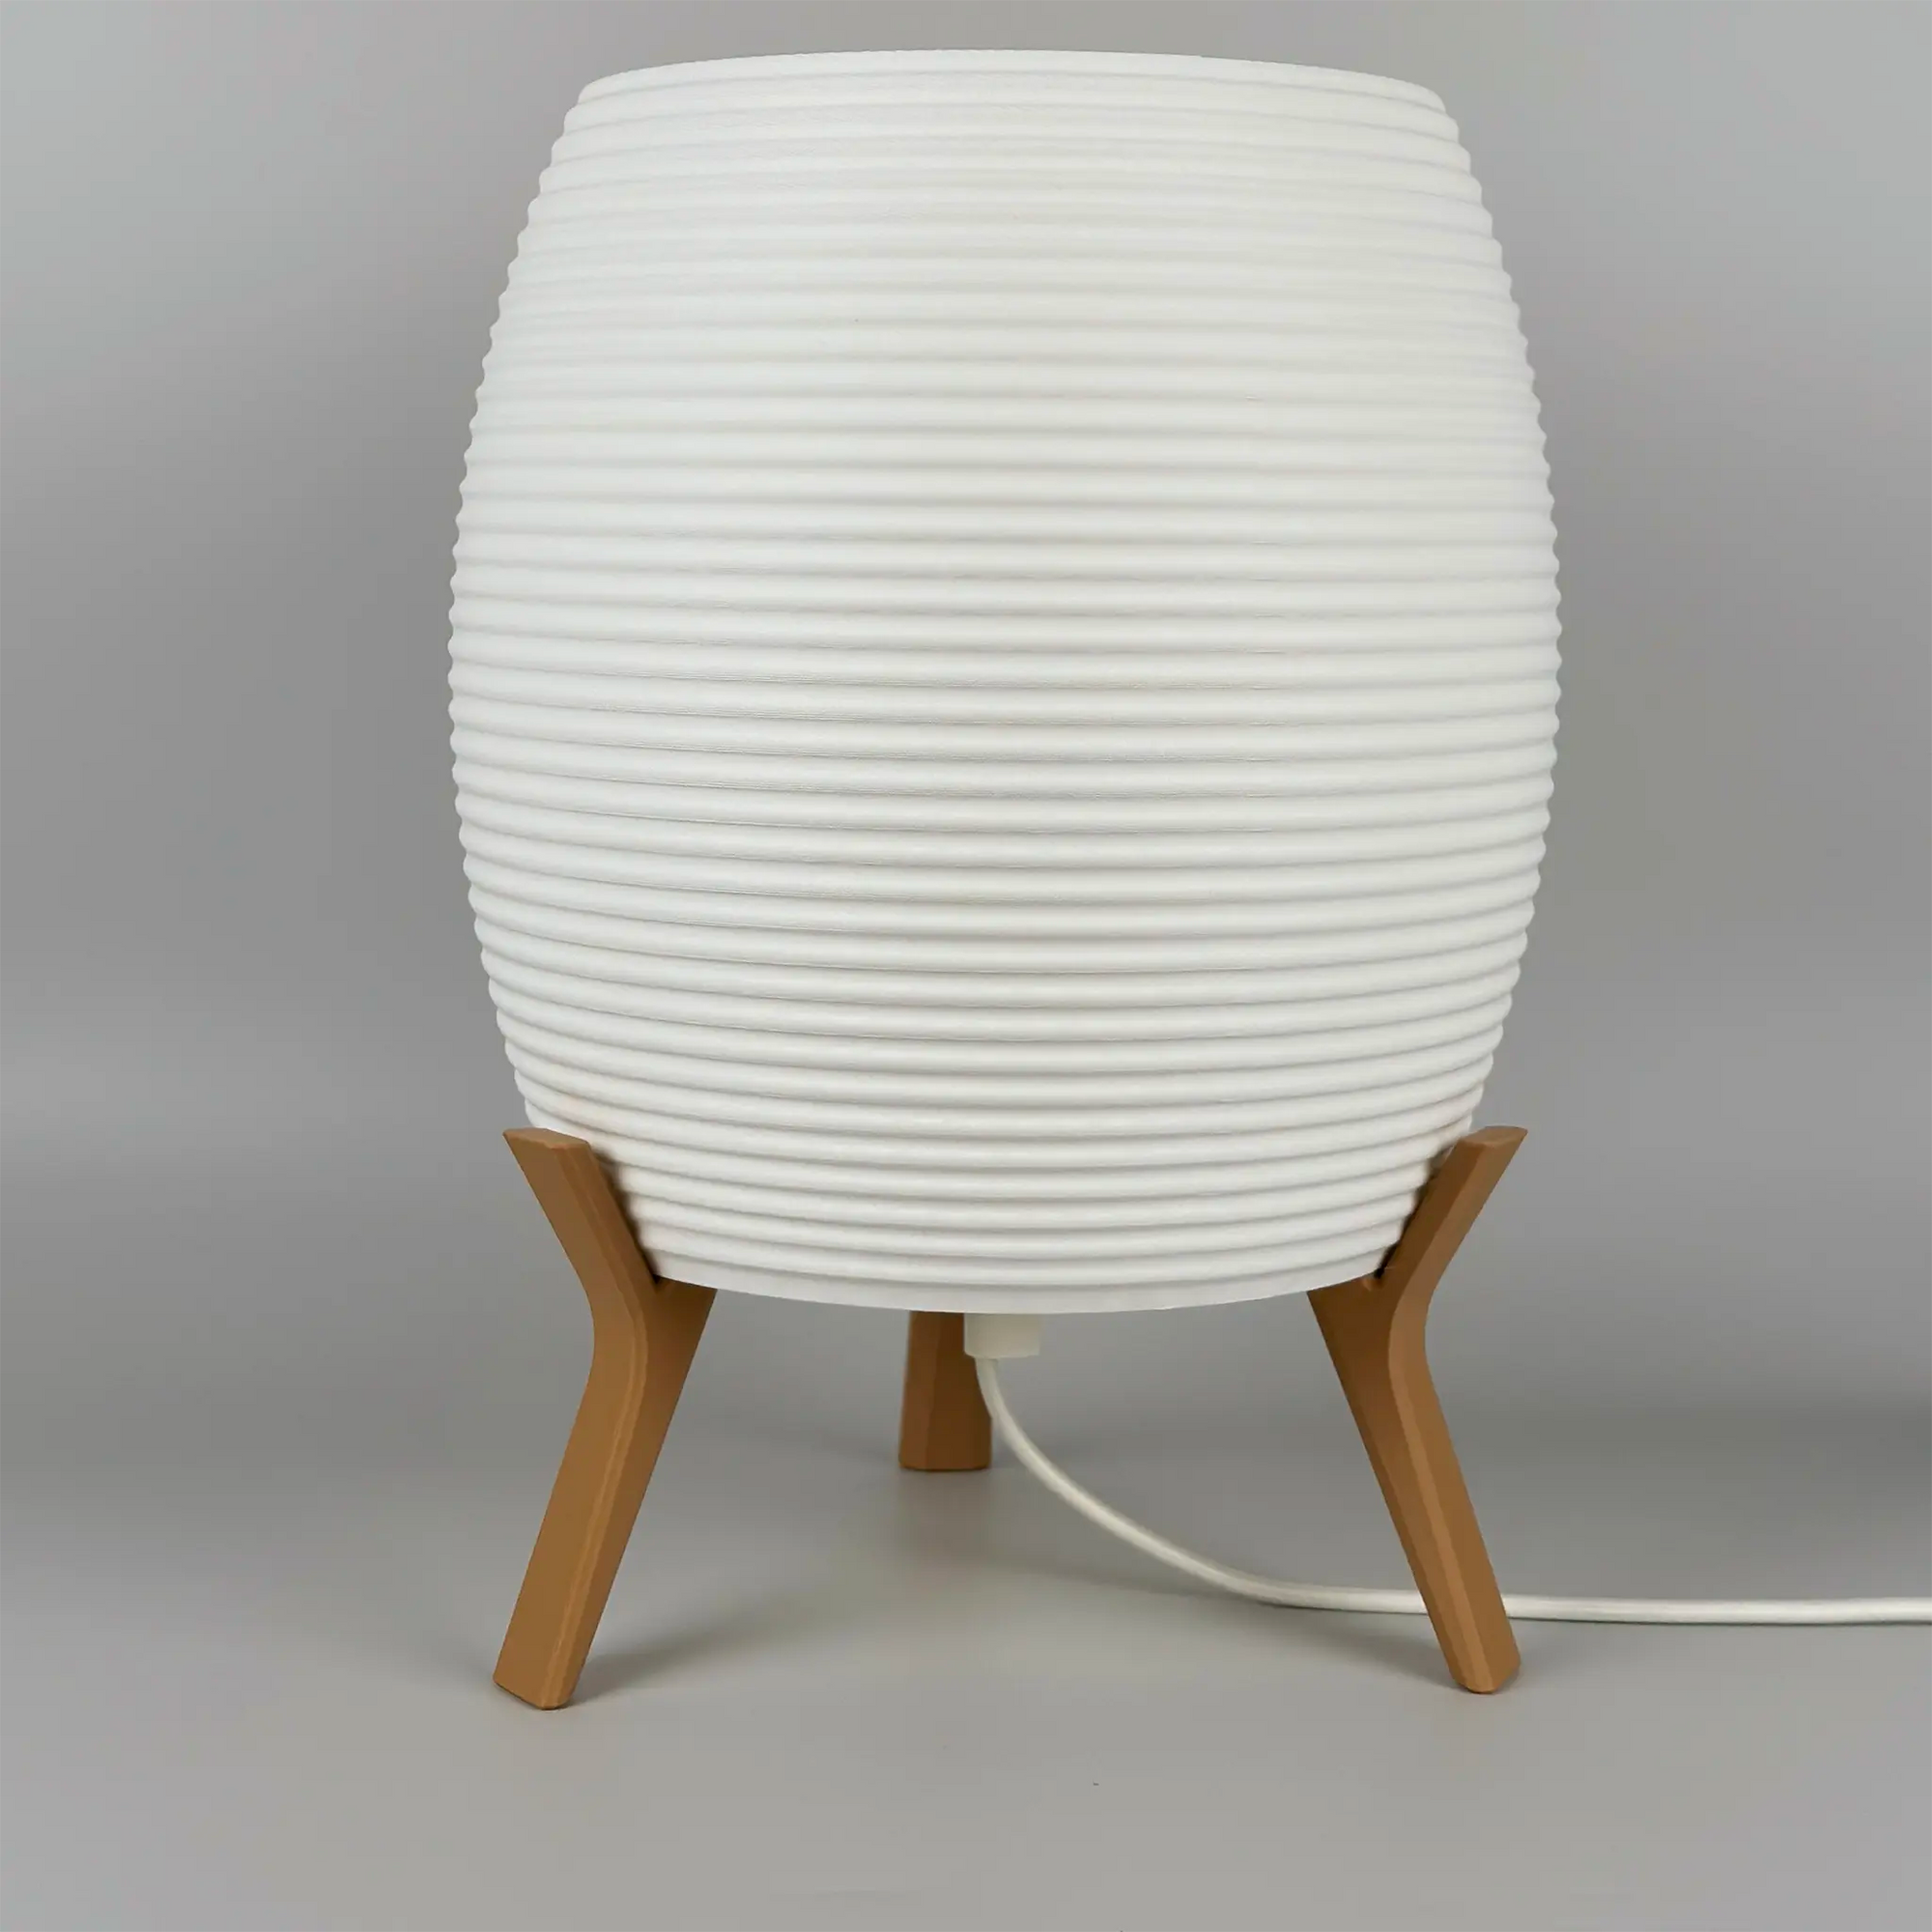 MinimalElegance Curve Table Lamp - Minimalist Bedside lamp in cotton white shade and wood brown base. Lamp is turned off.